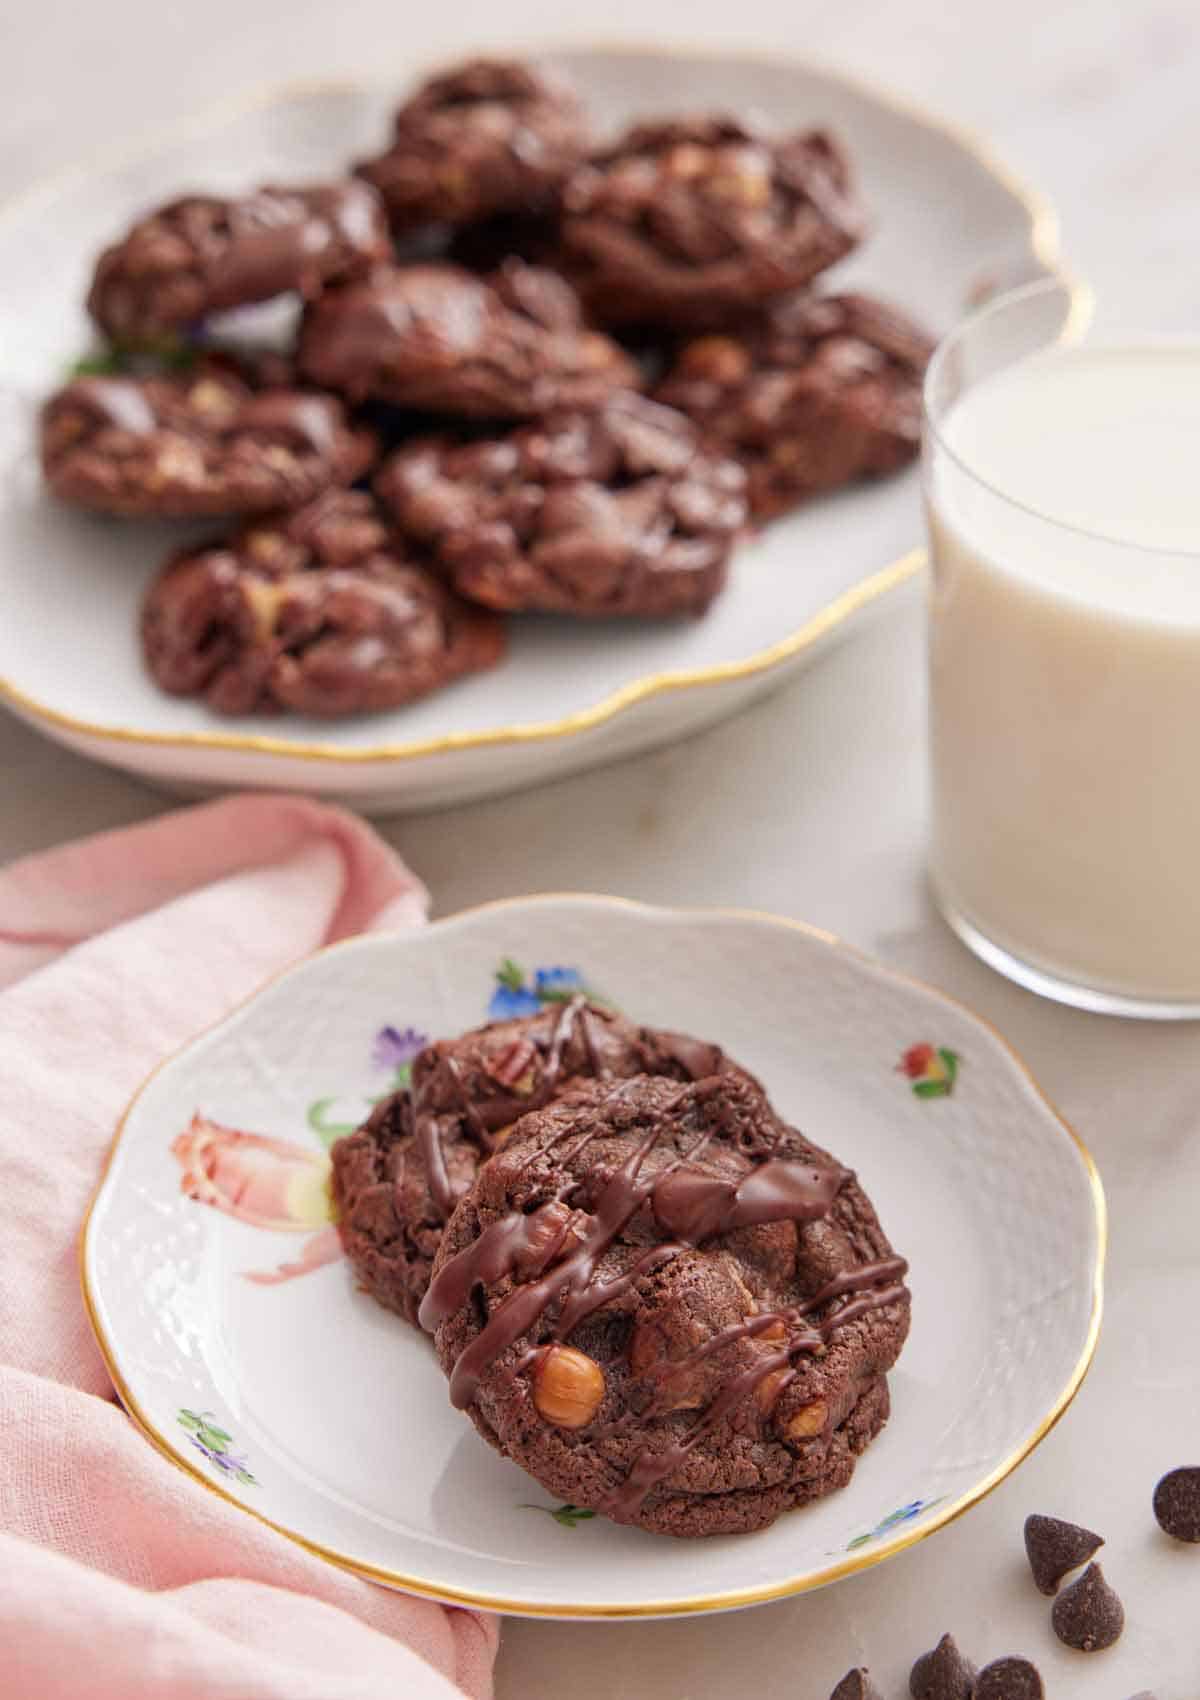 A plate with two turtle cookies with a glass of milk and platter of cookies in the background.